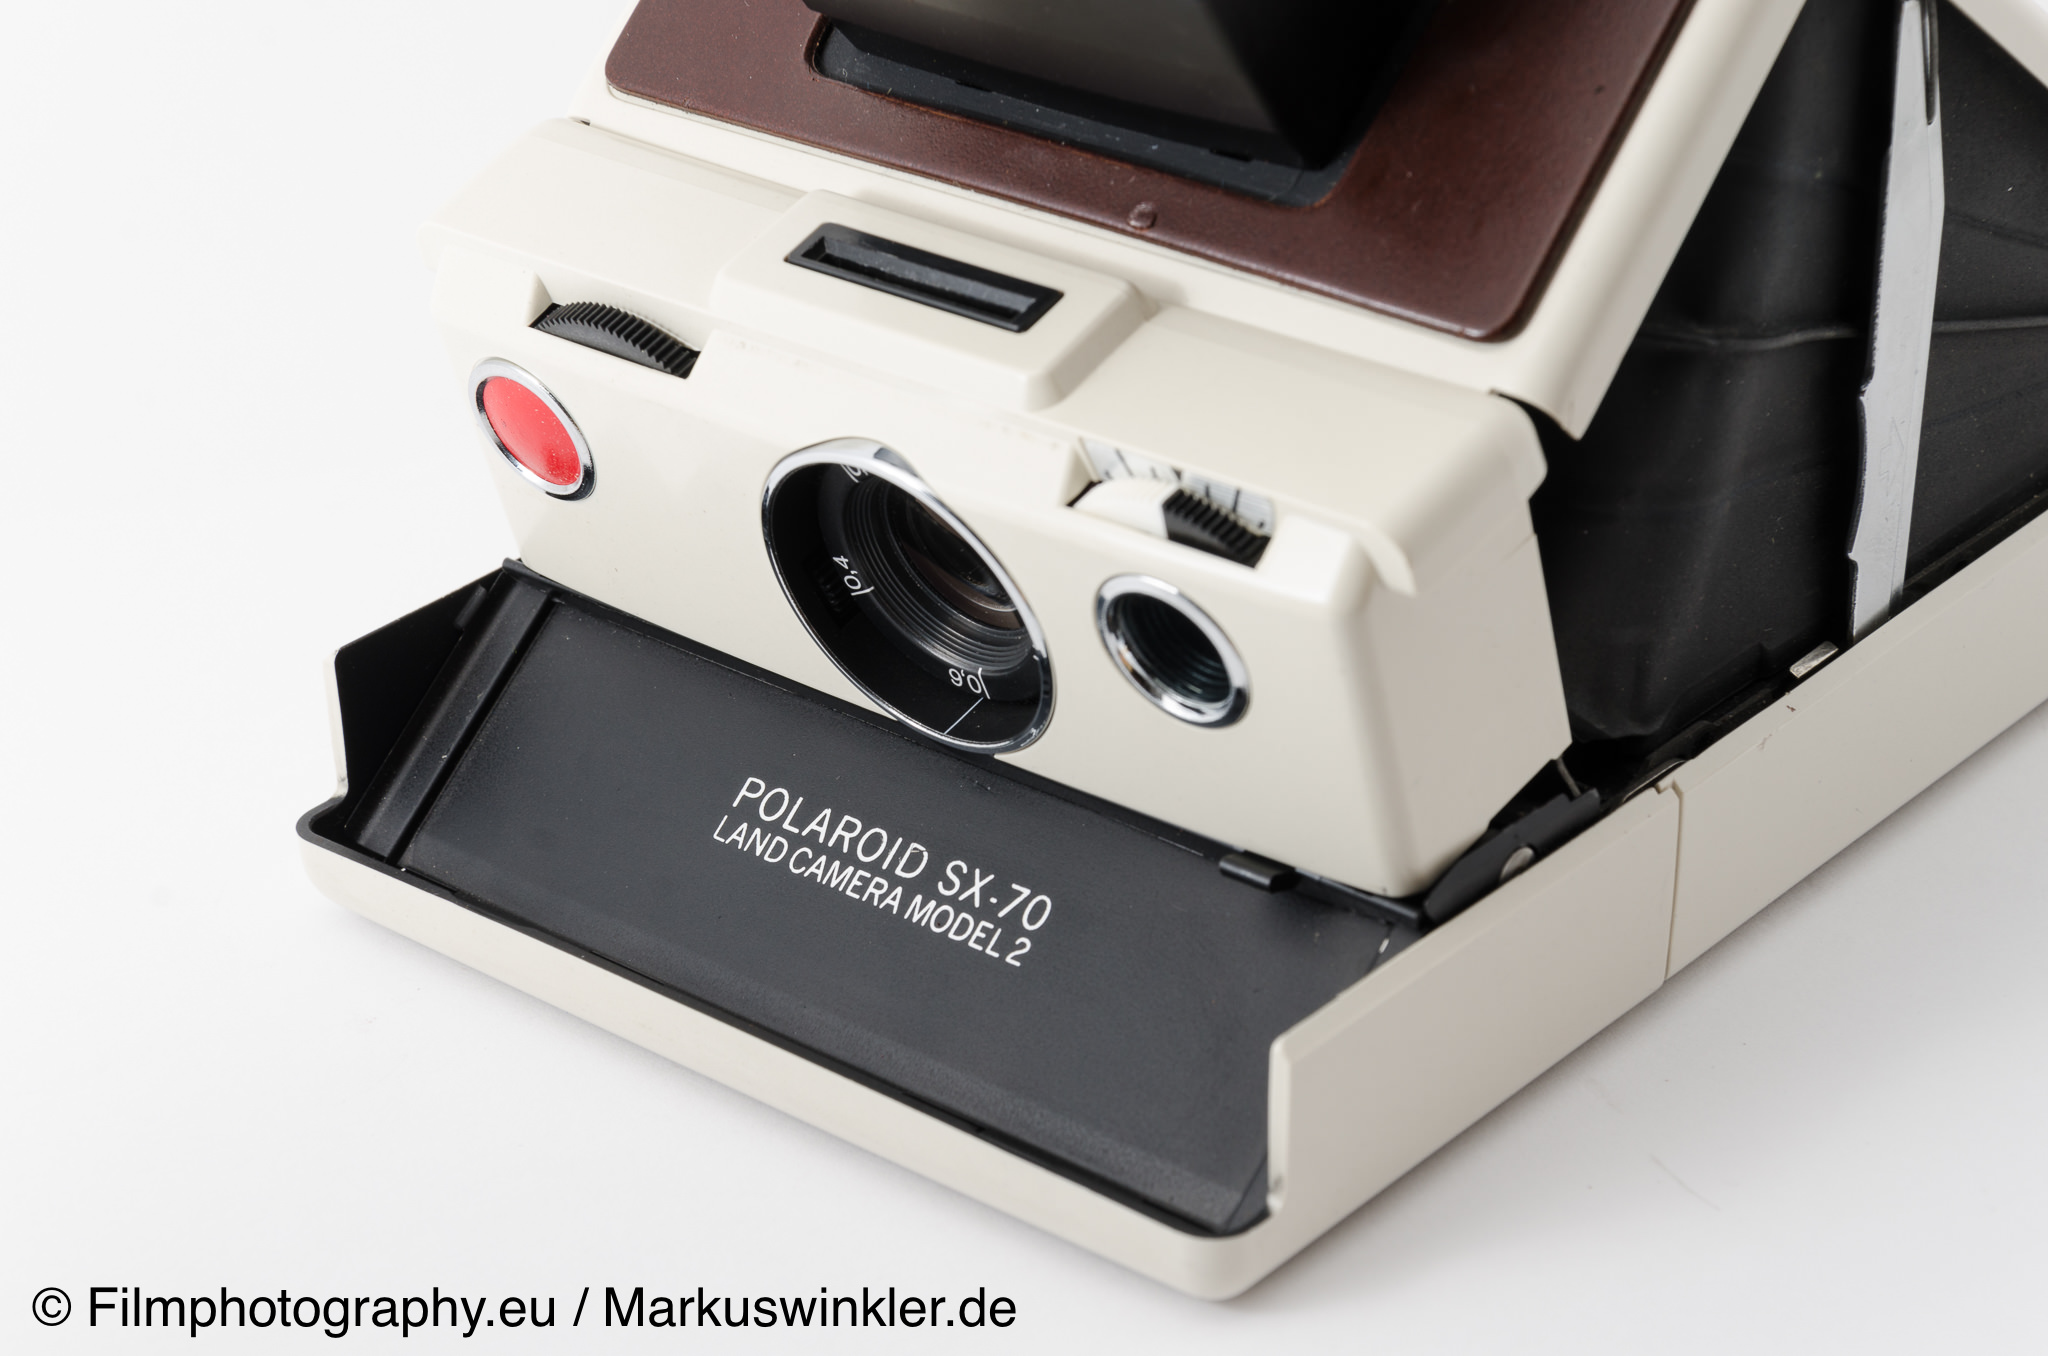 Polaroid SX-70 Model 2 - Features and Films